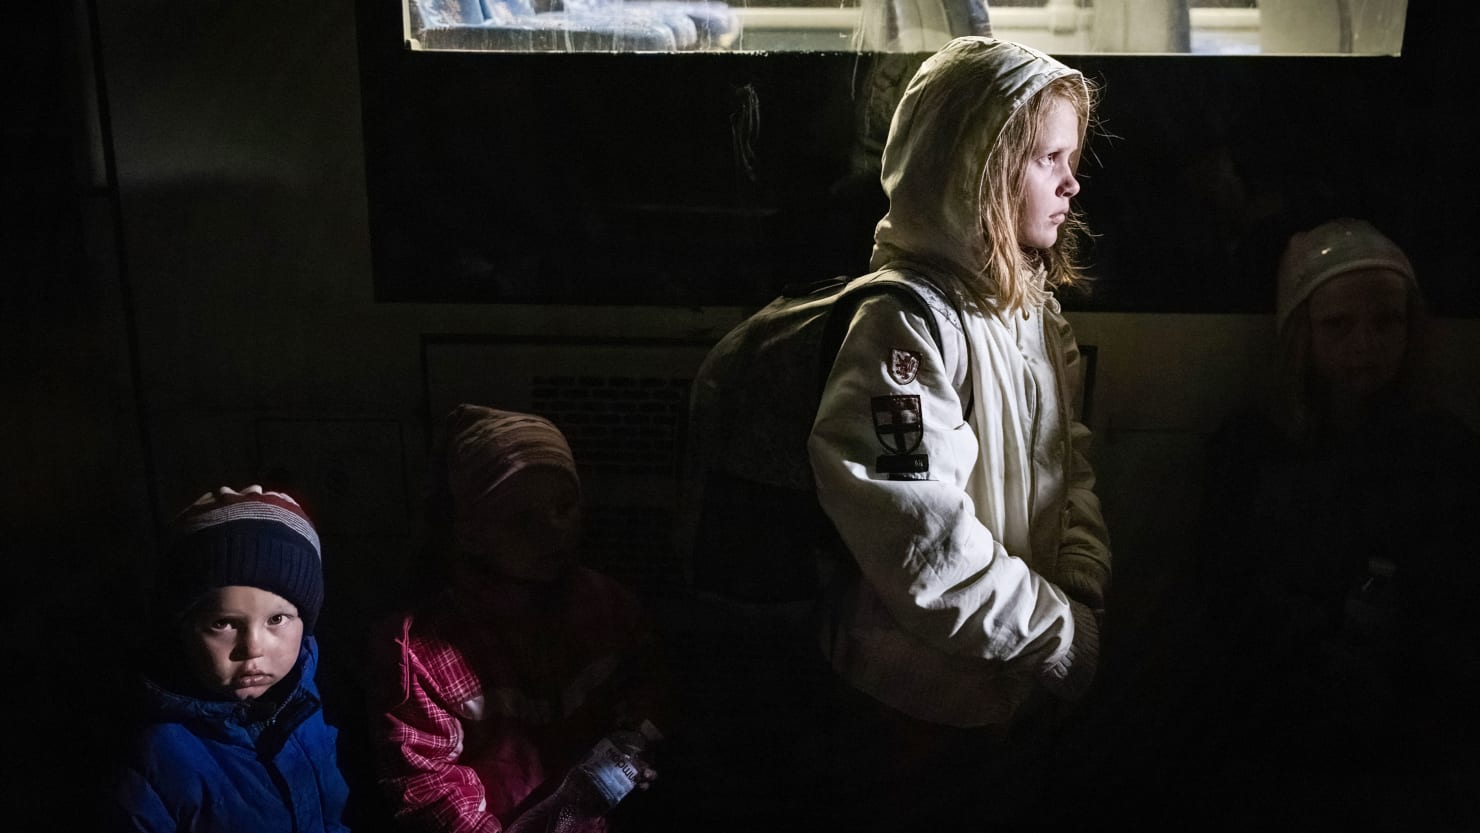 Ukraine’s Child Refugees Need Help. Here’s How the World Can Step Up.